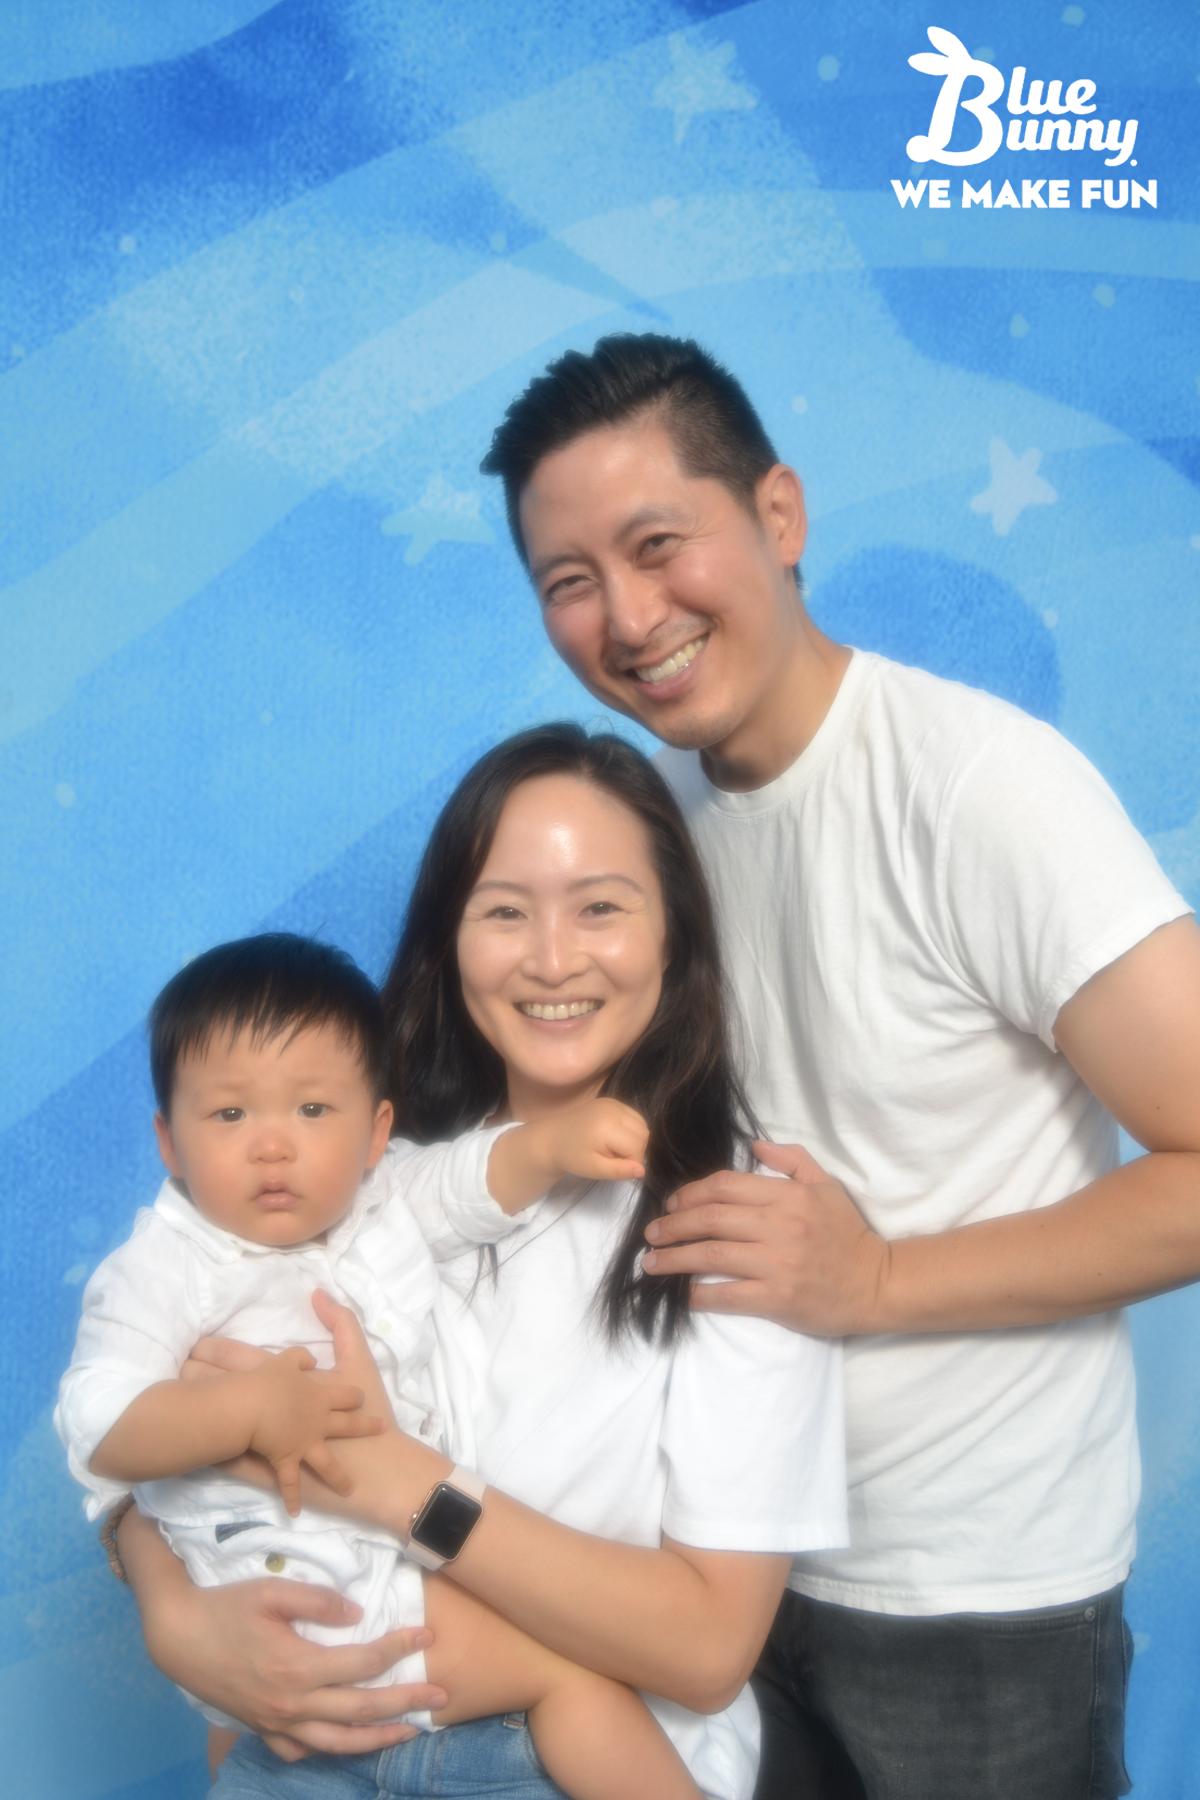 Two parents in white shirts holding their baby